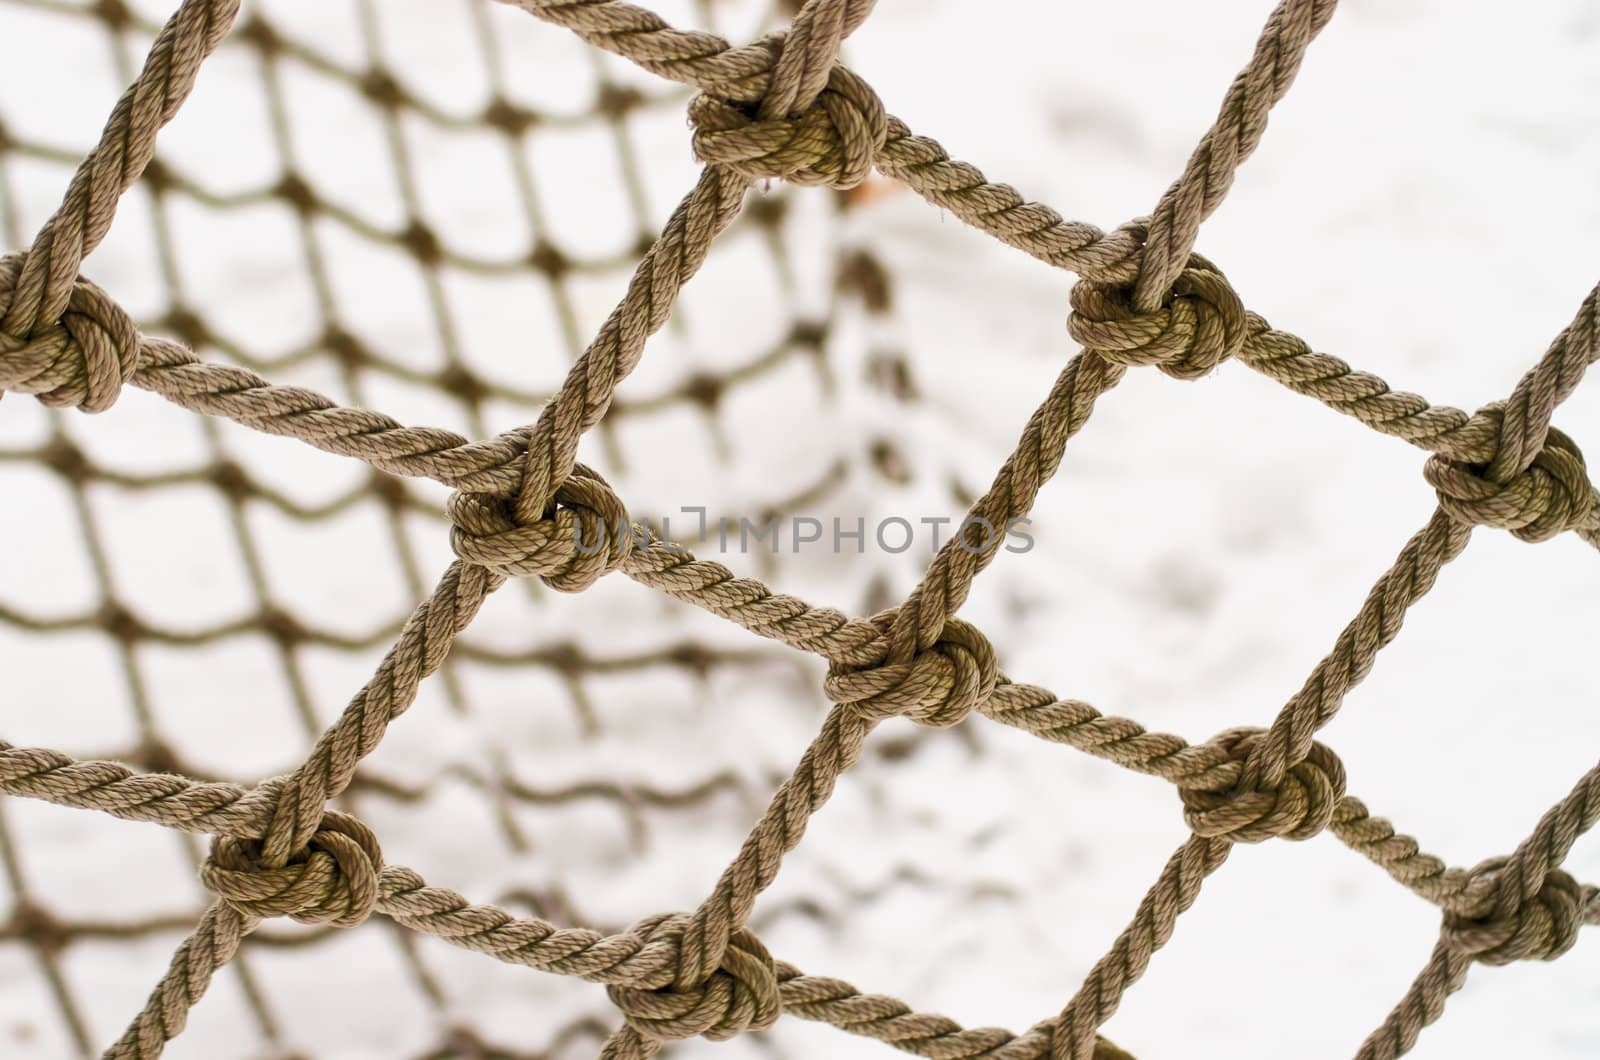 The nodes of the old woven mesh